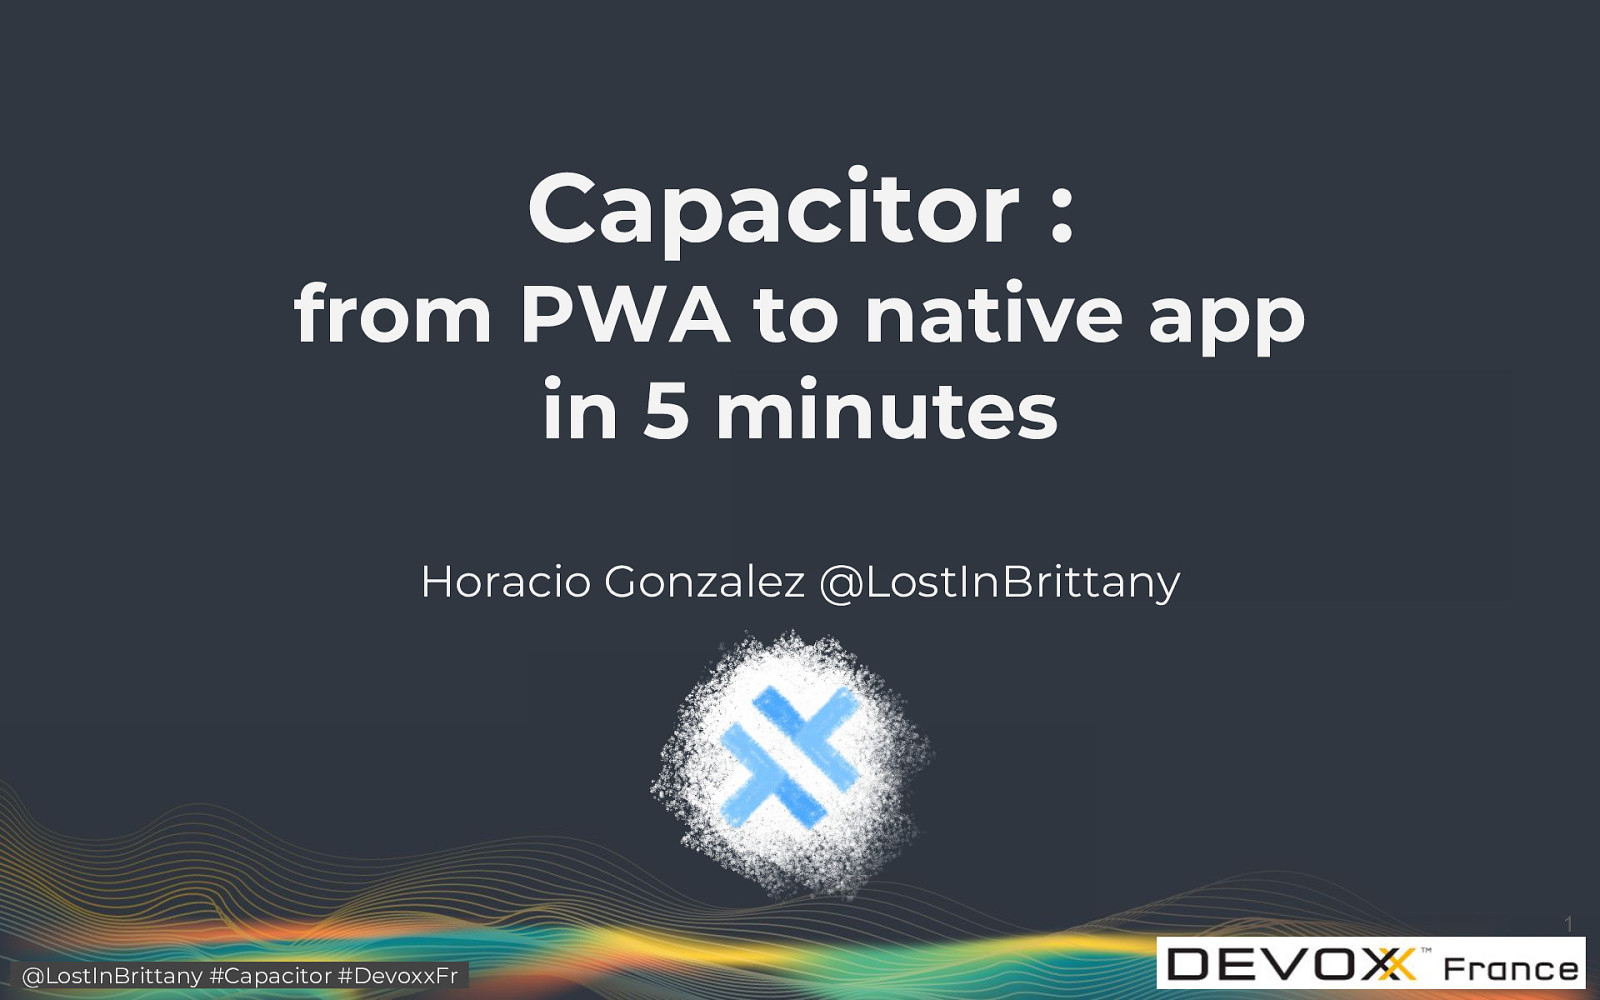 Capacitor: from PWA to native app in 5 minutes